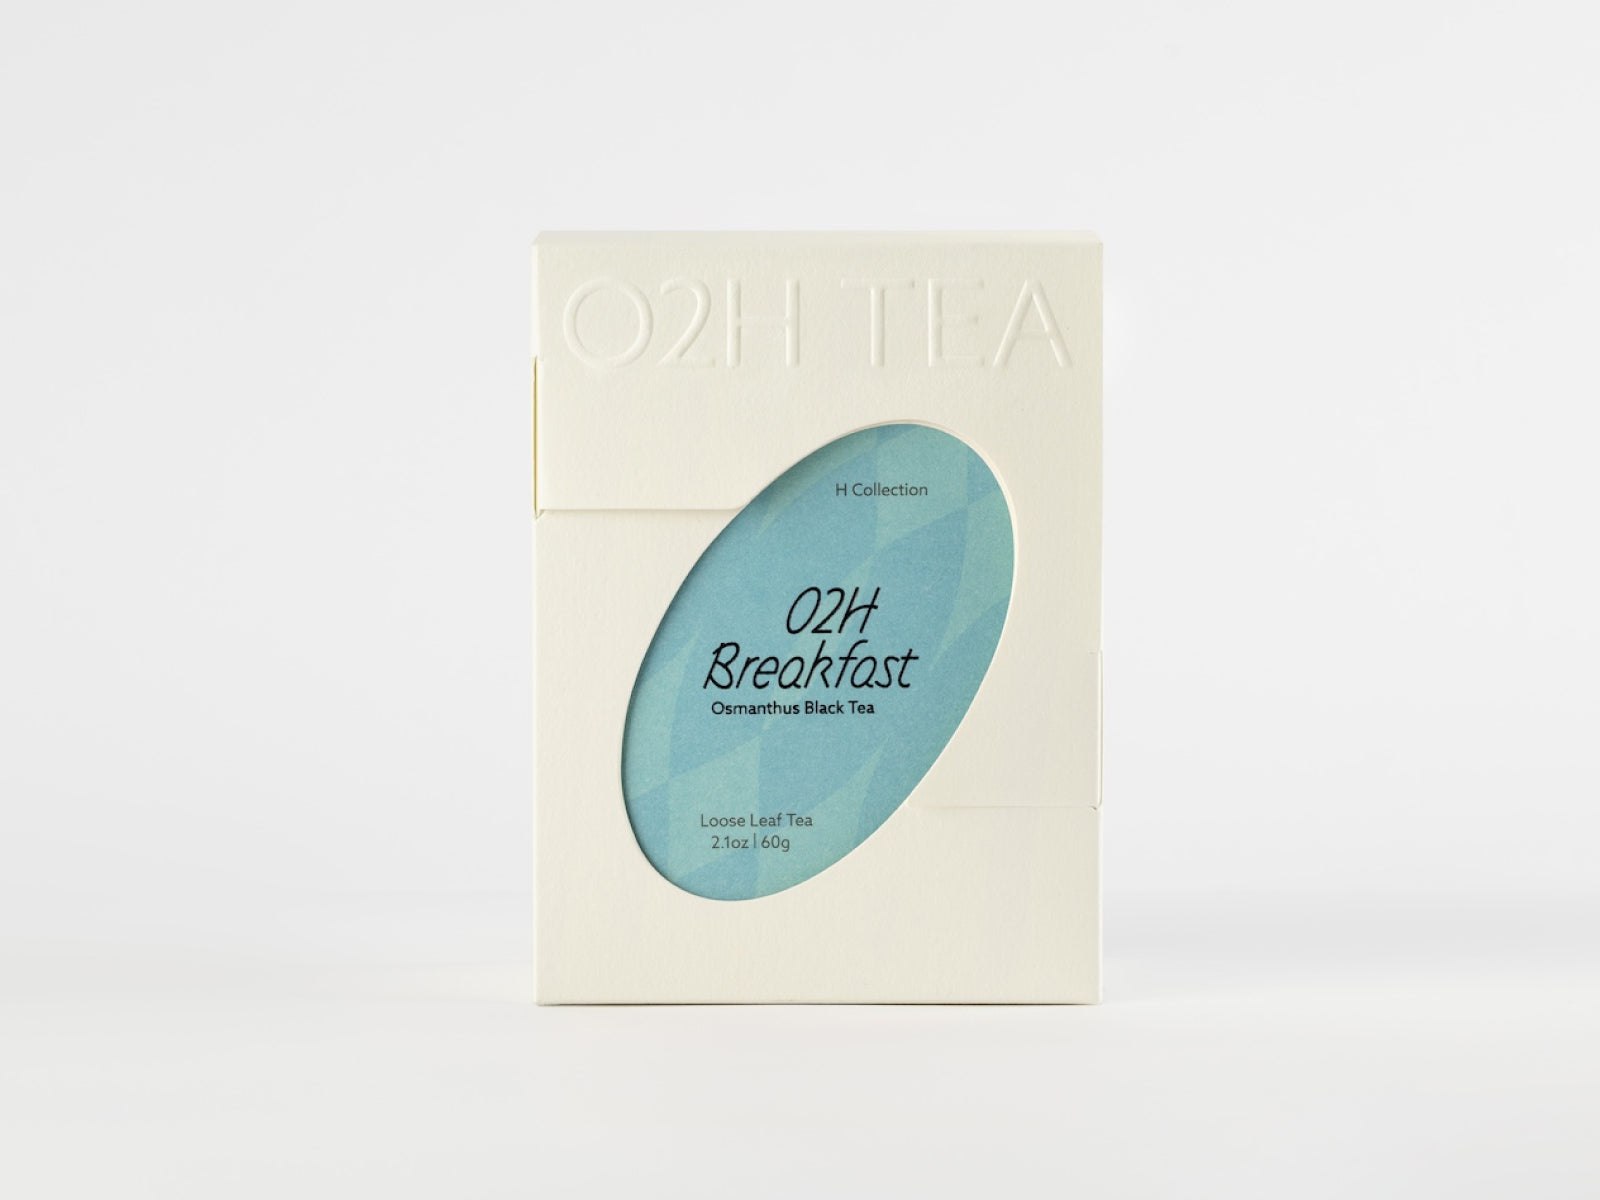 A package of O2H Breakfast Tea featuring Osmanthus Black Tea, with a sophisticated design and a peek window revealing product name O2H breakfast